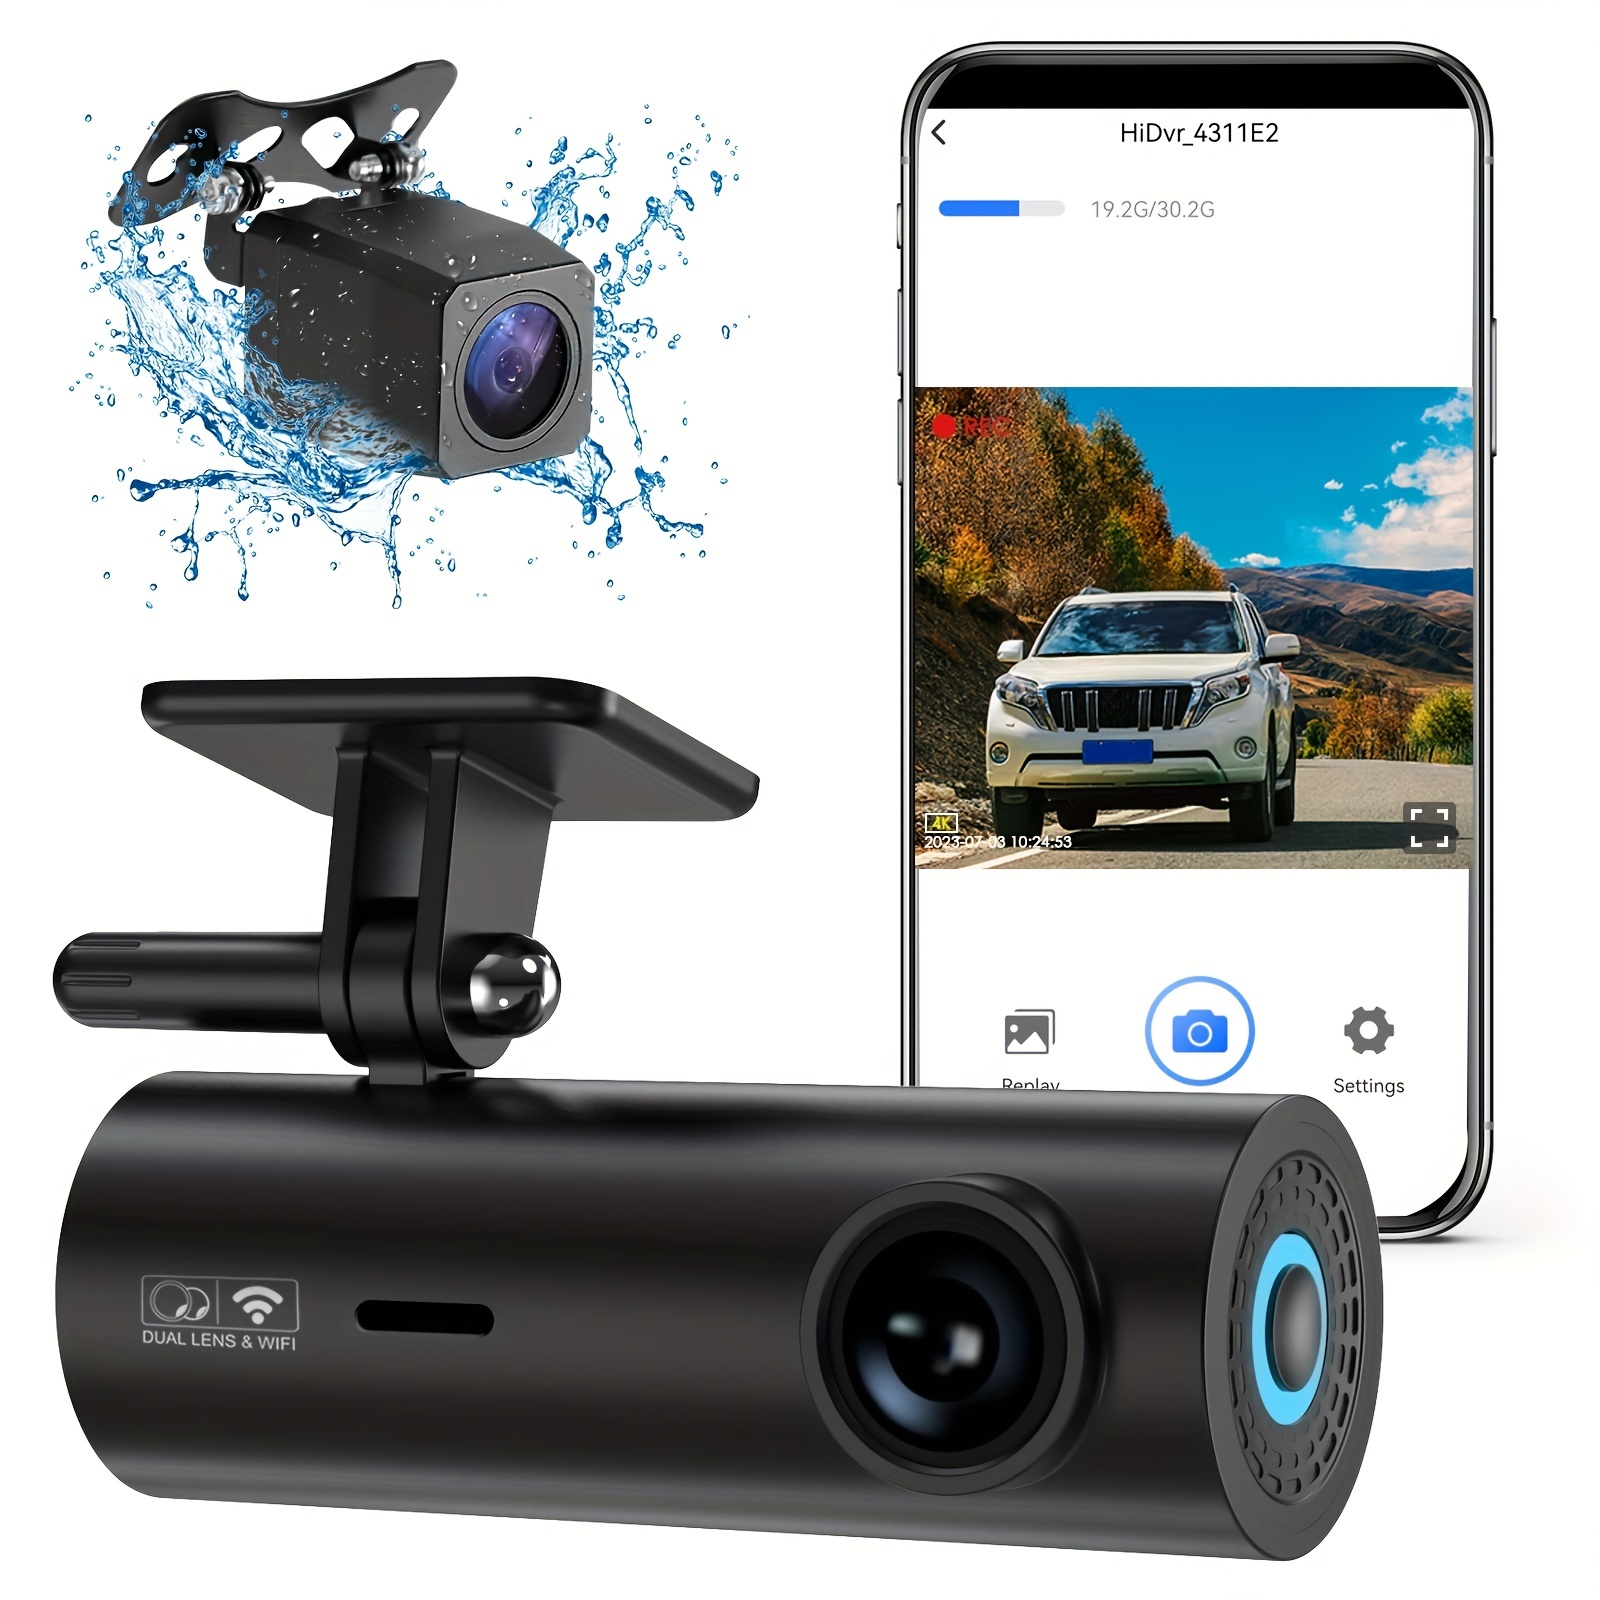 Dual Dash Cam 2k+1080p Front And Rear, Built-in Wifi, 4k Single Front Dash  Camera For Cars, Dash Cams For Cars With Night Vision, Support 256gb Max -  Temu